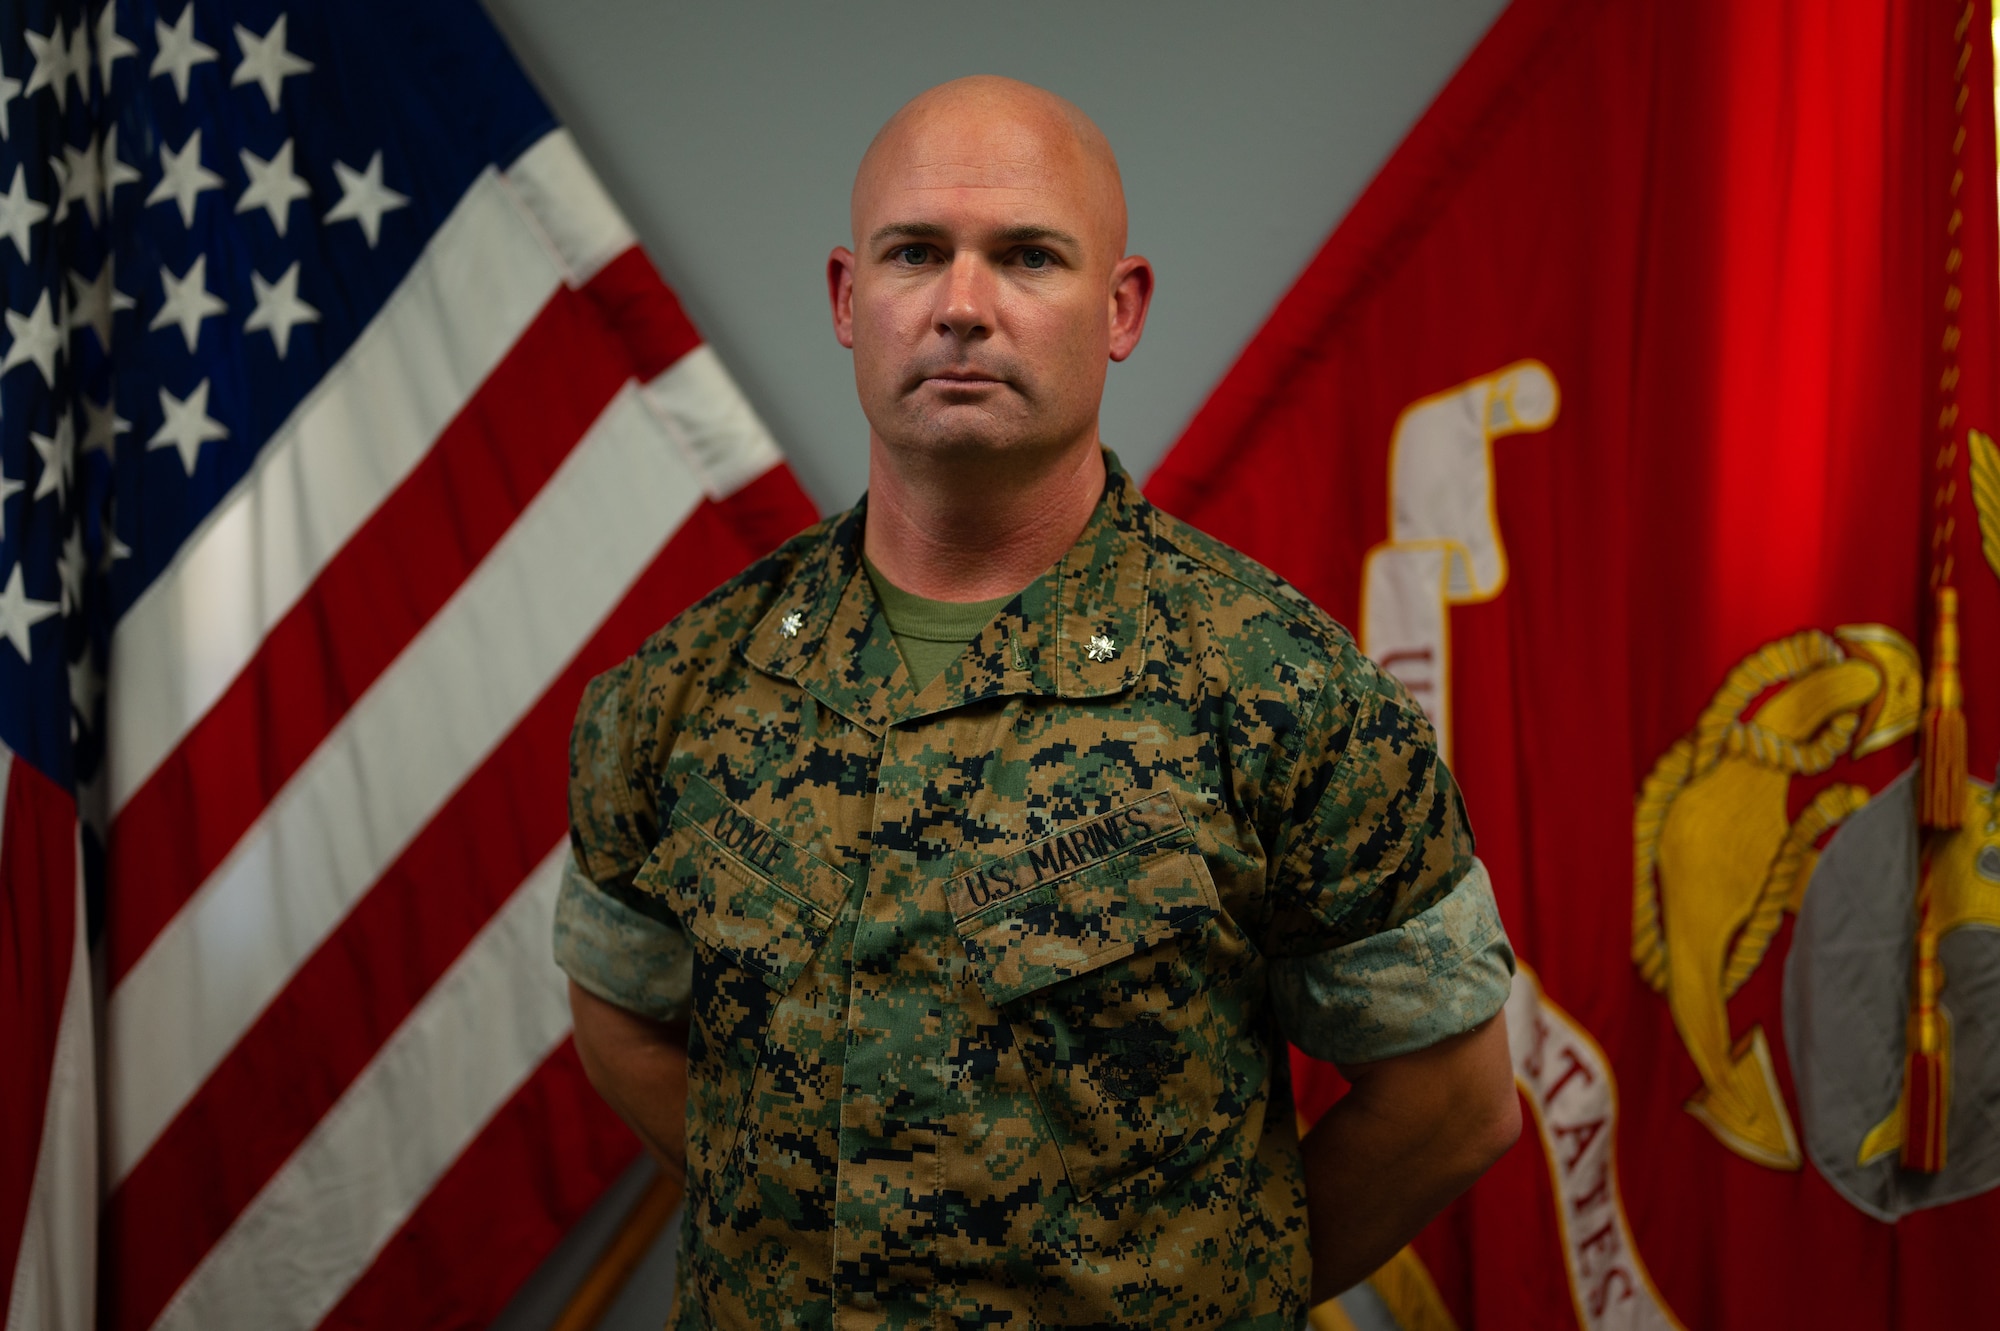 U.S. Marine Corps Lt. Col. Thomas Coyle, Marine Corps Detachment Goodfellow commander, poses for photo in front of the U.S. and U.S. Marine Corps flags, Goodfellow Air Force Base, Texas, August 1, 2022. As commander of MCD Goodfellow, Coyle oversees 92 permanent party Marines and facilitates the training of multiple military occupational specialties. (U.S. Air Force photo by Senior Airman Michael Bowman)